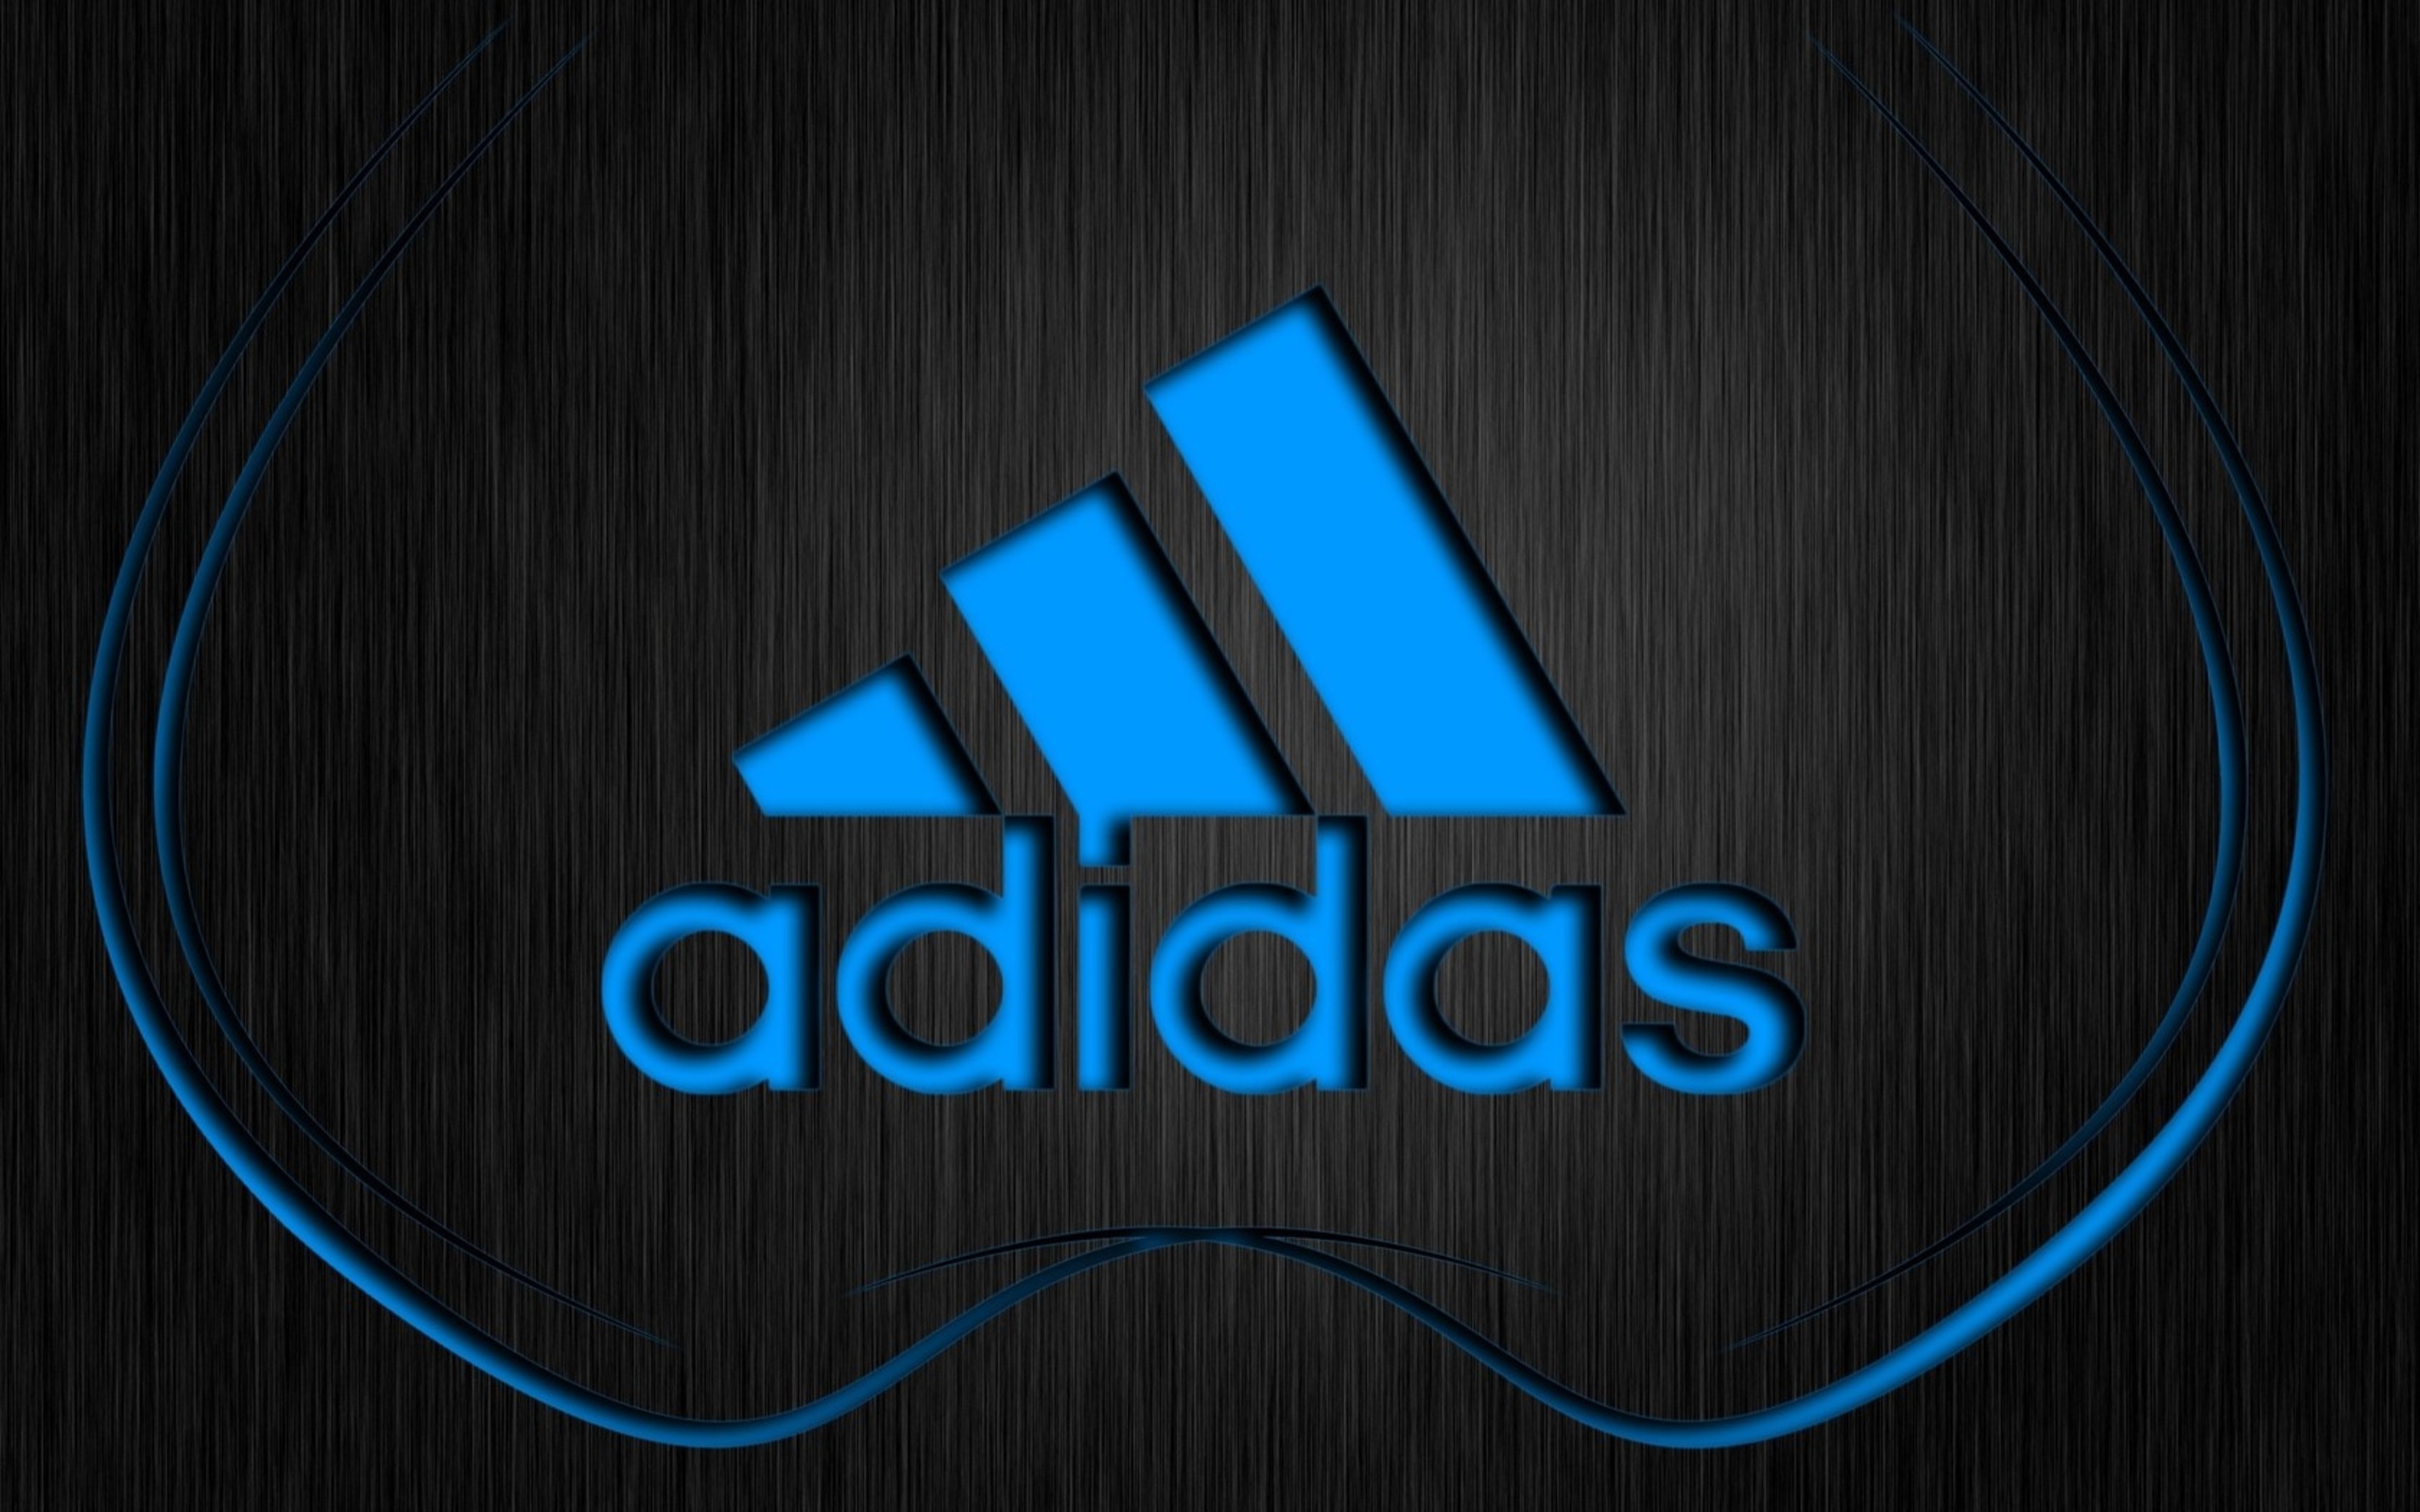 HD wallpaper adidas images for desktop background shoe cut out white  background  Wallpaper Flare